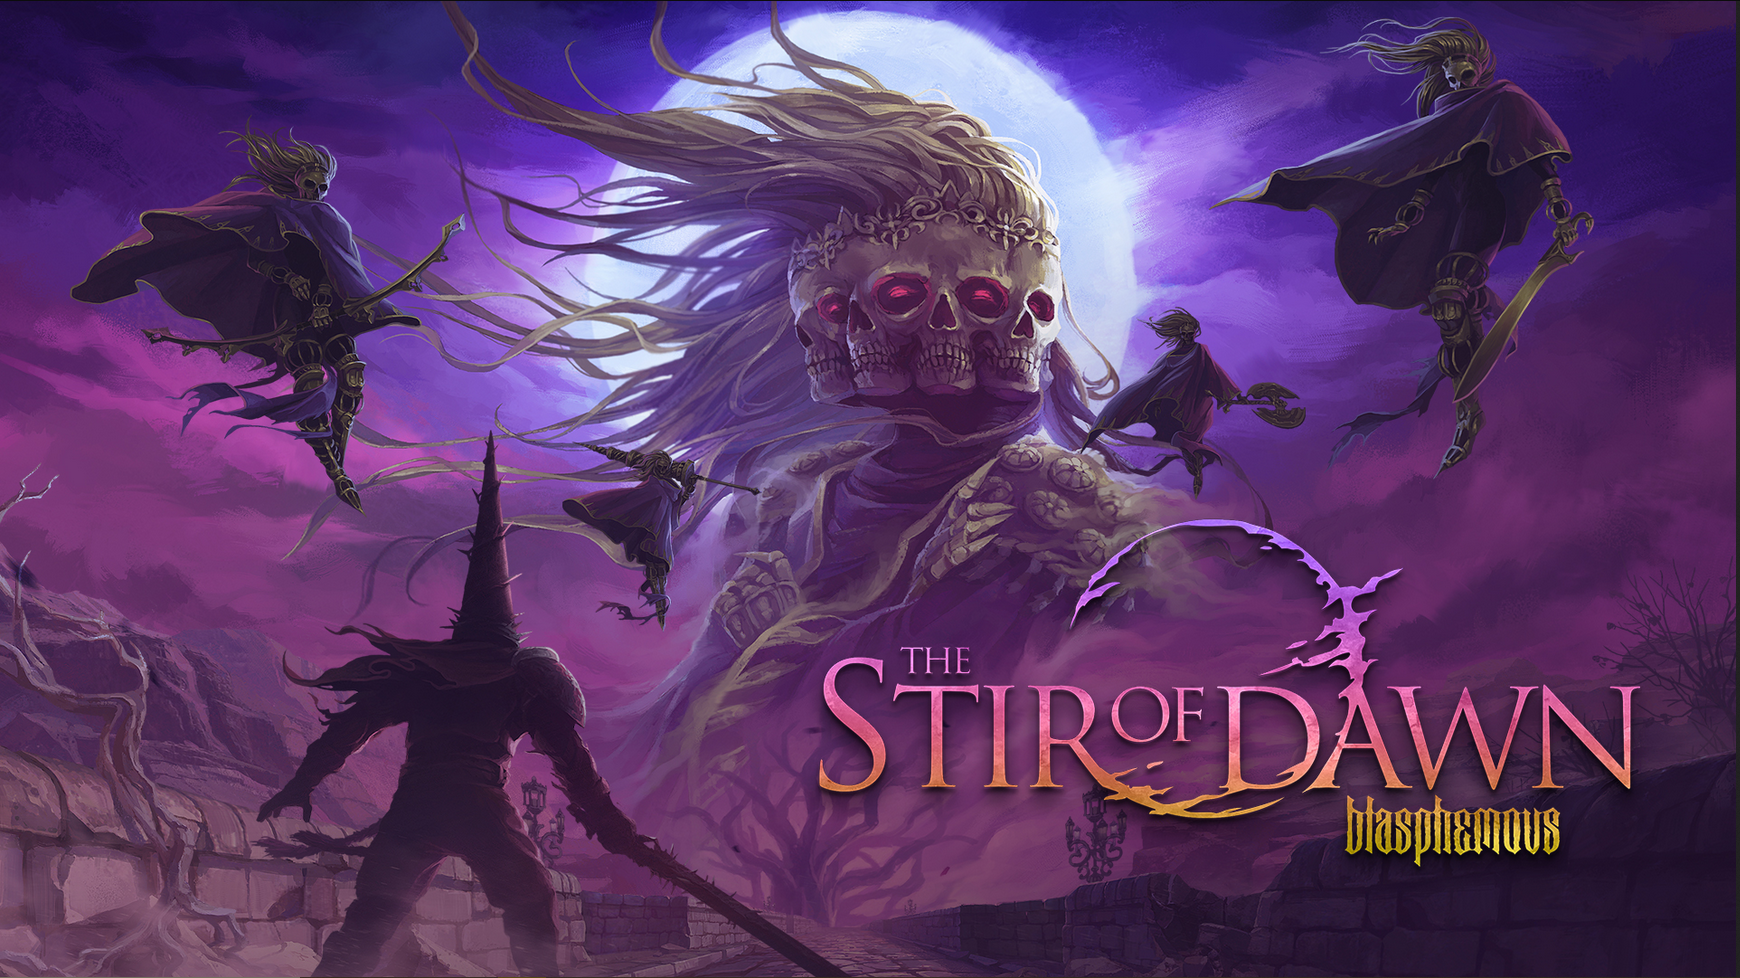 Stir of Dawn, a free DLC for Blasphemous, has been announced by publisher Team17.